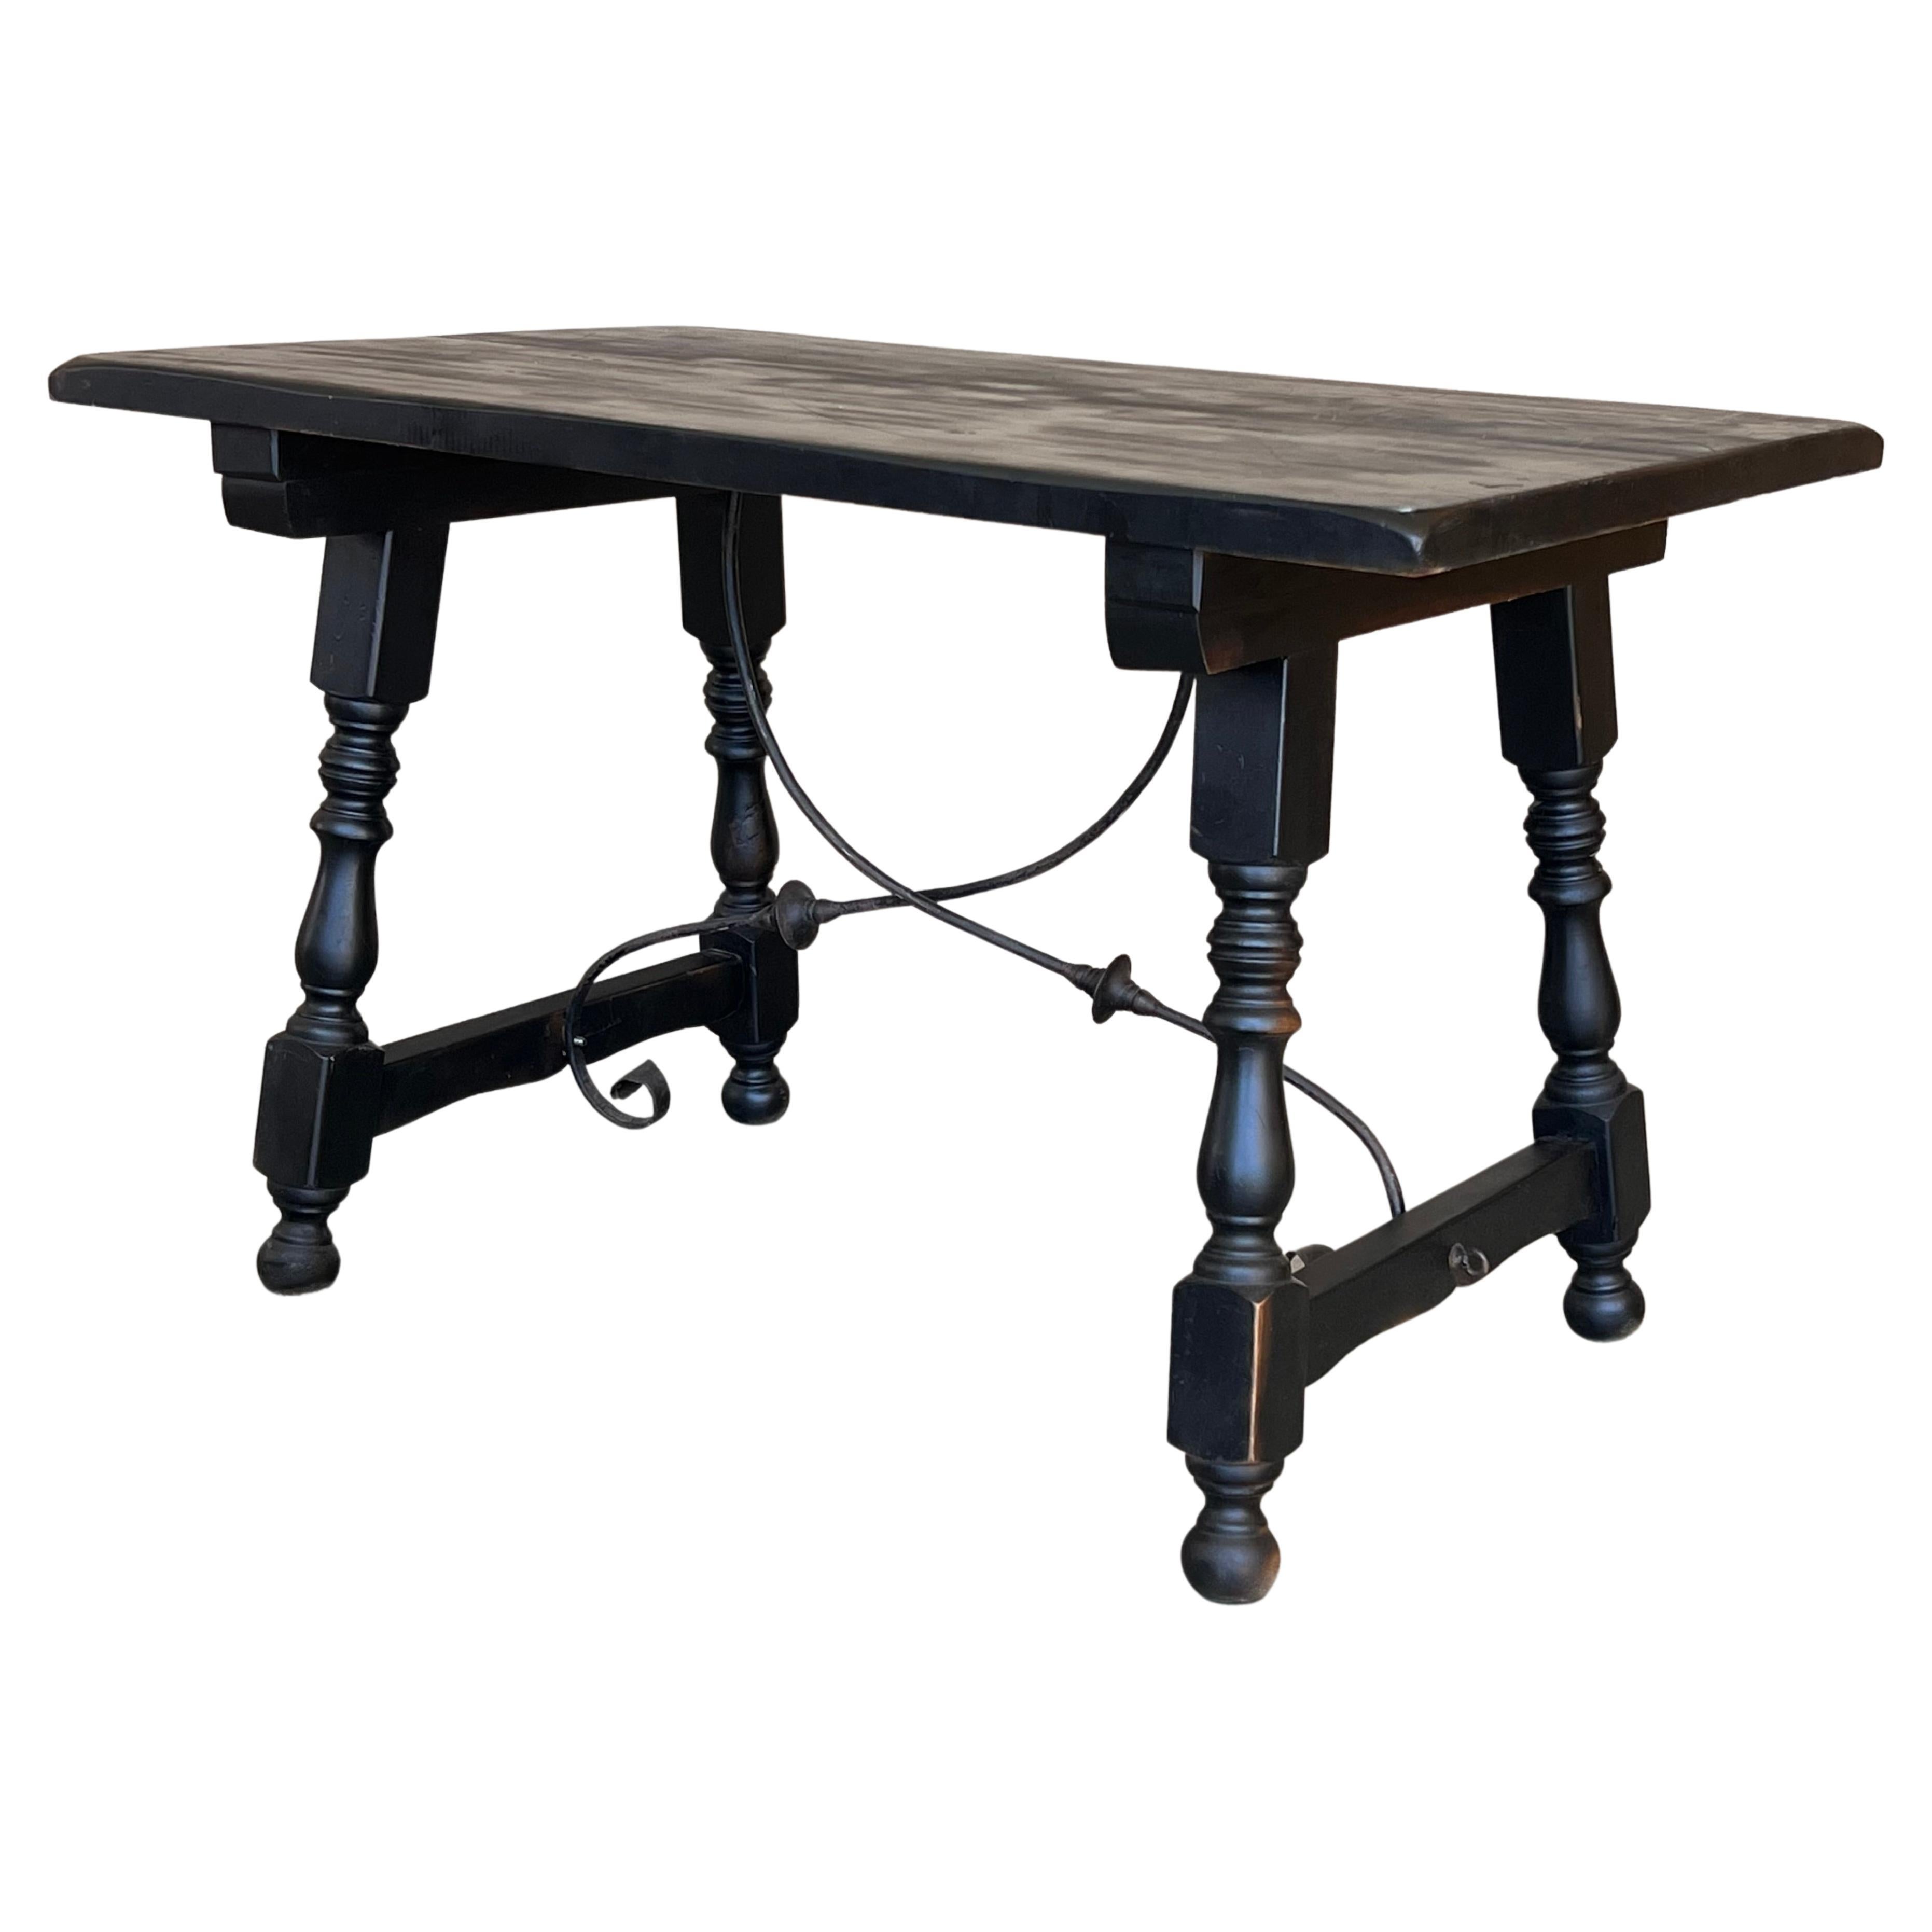 Late 19th Spanish Walnut Dining or Desk Fratino Table with Iron Stretcher For Sale